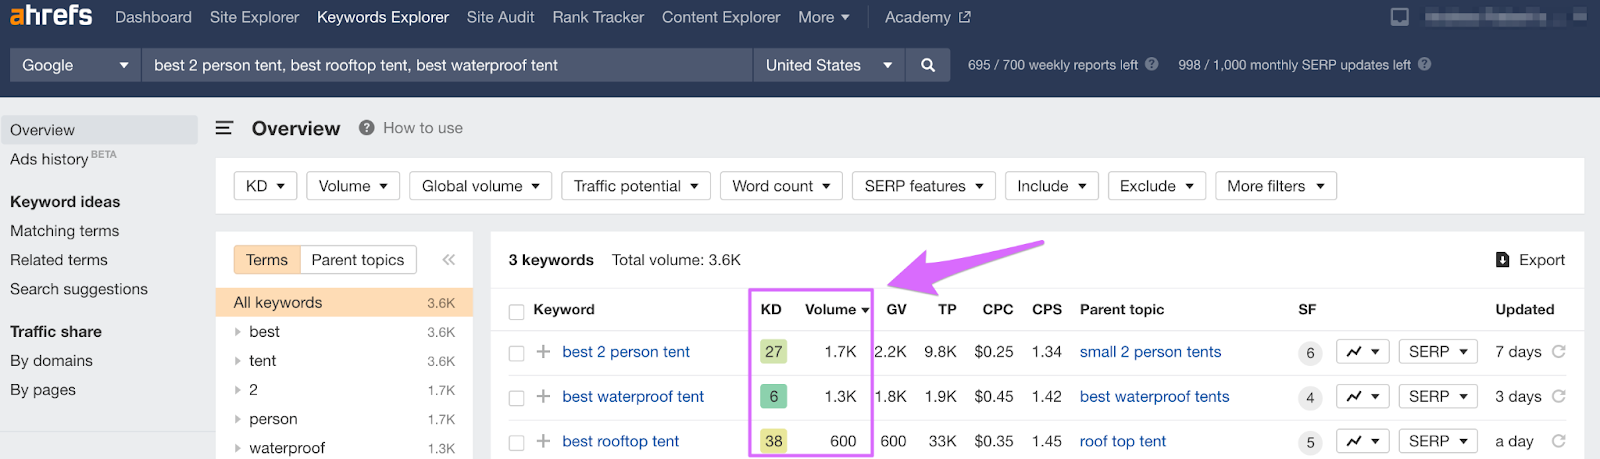 ahrefs keyword reports of terms with low volume and ranking difficulty